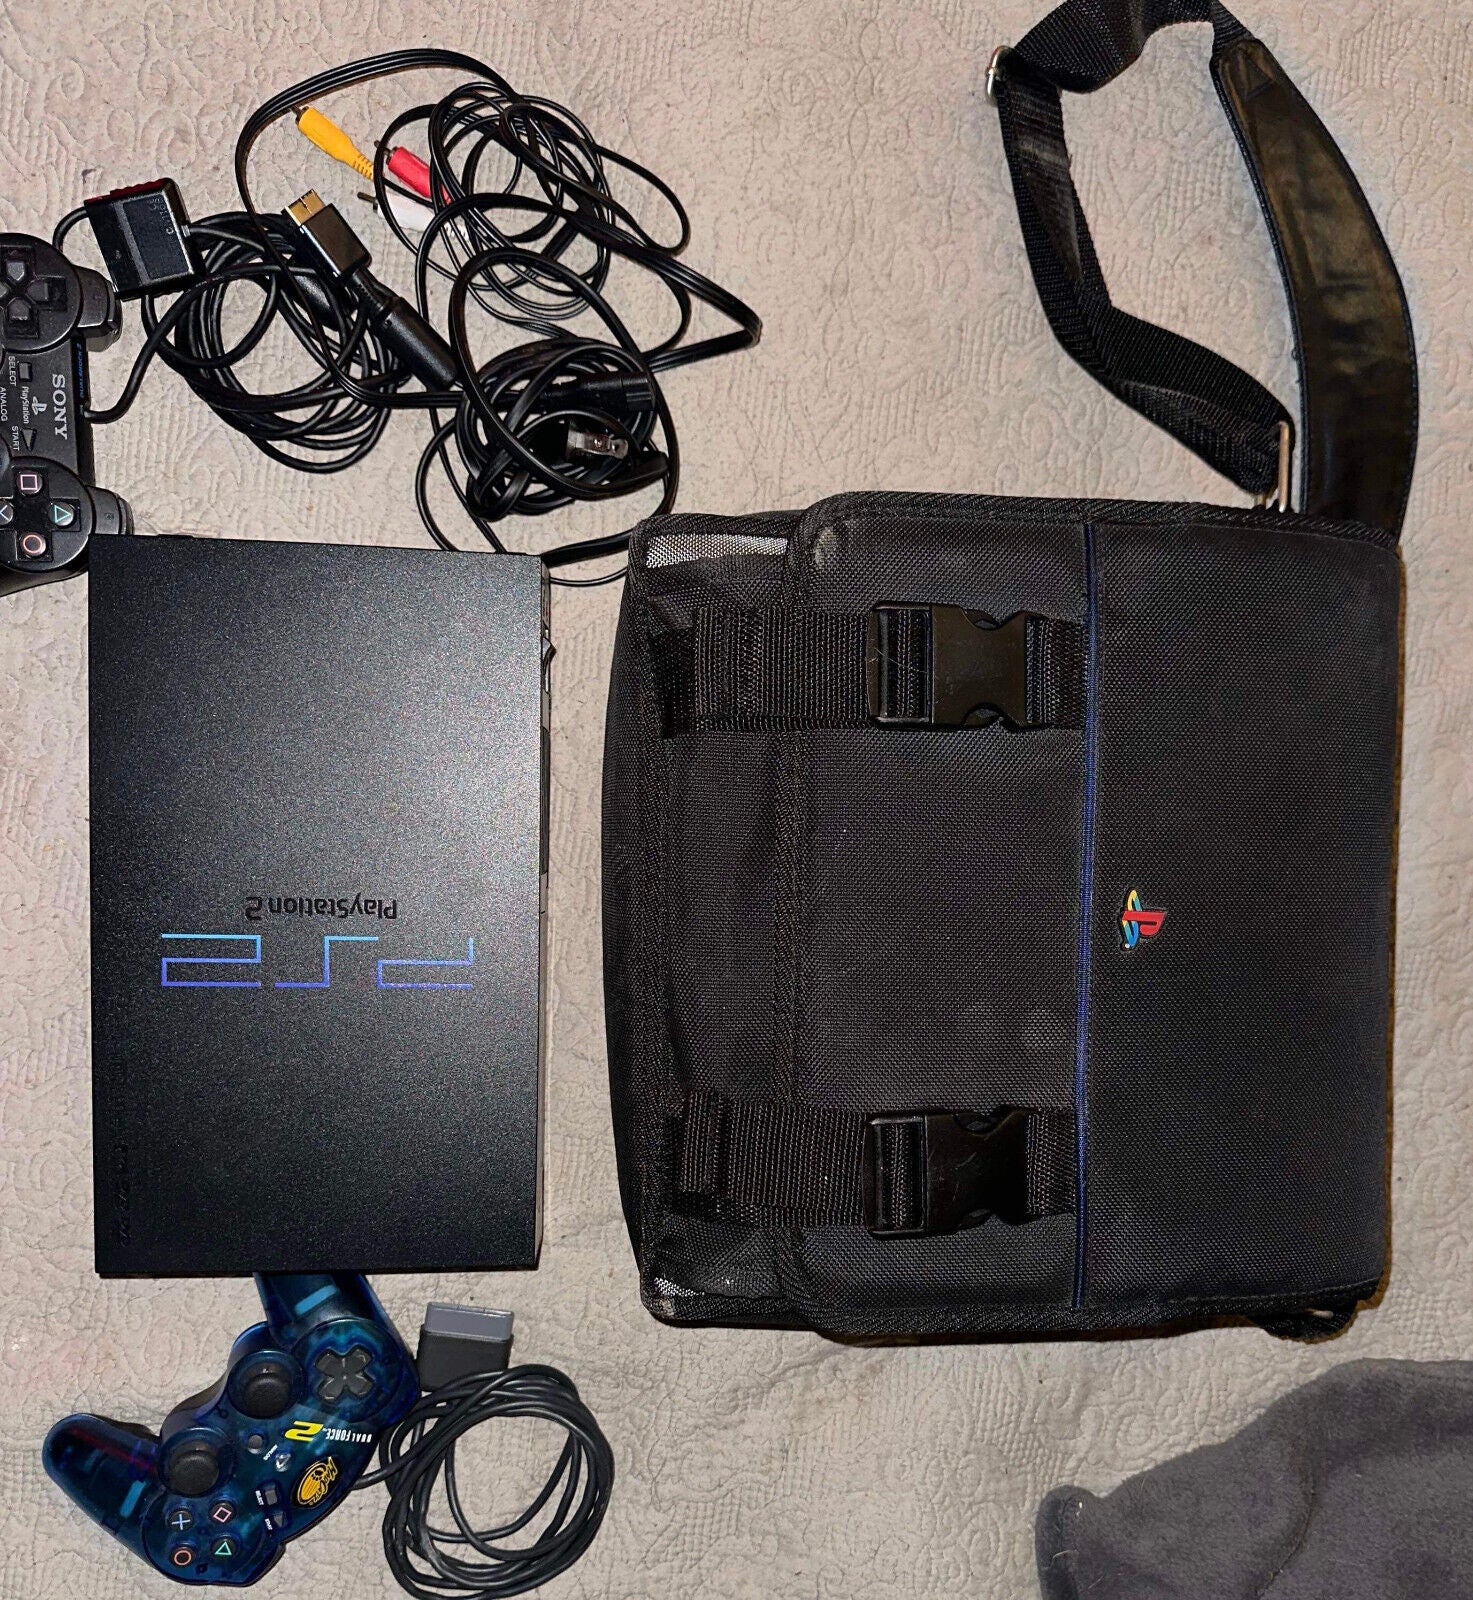 PS2 - Playstation 2 Console w 2 Controllers / Accessories / Game Bag